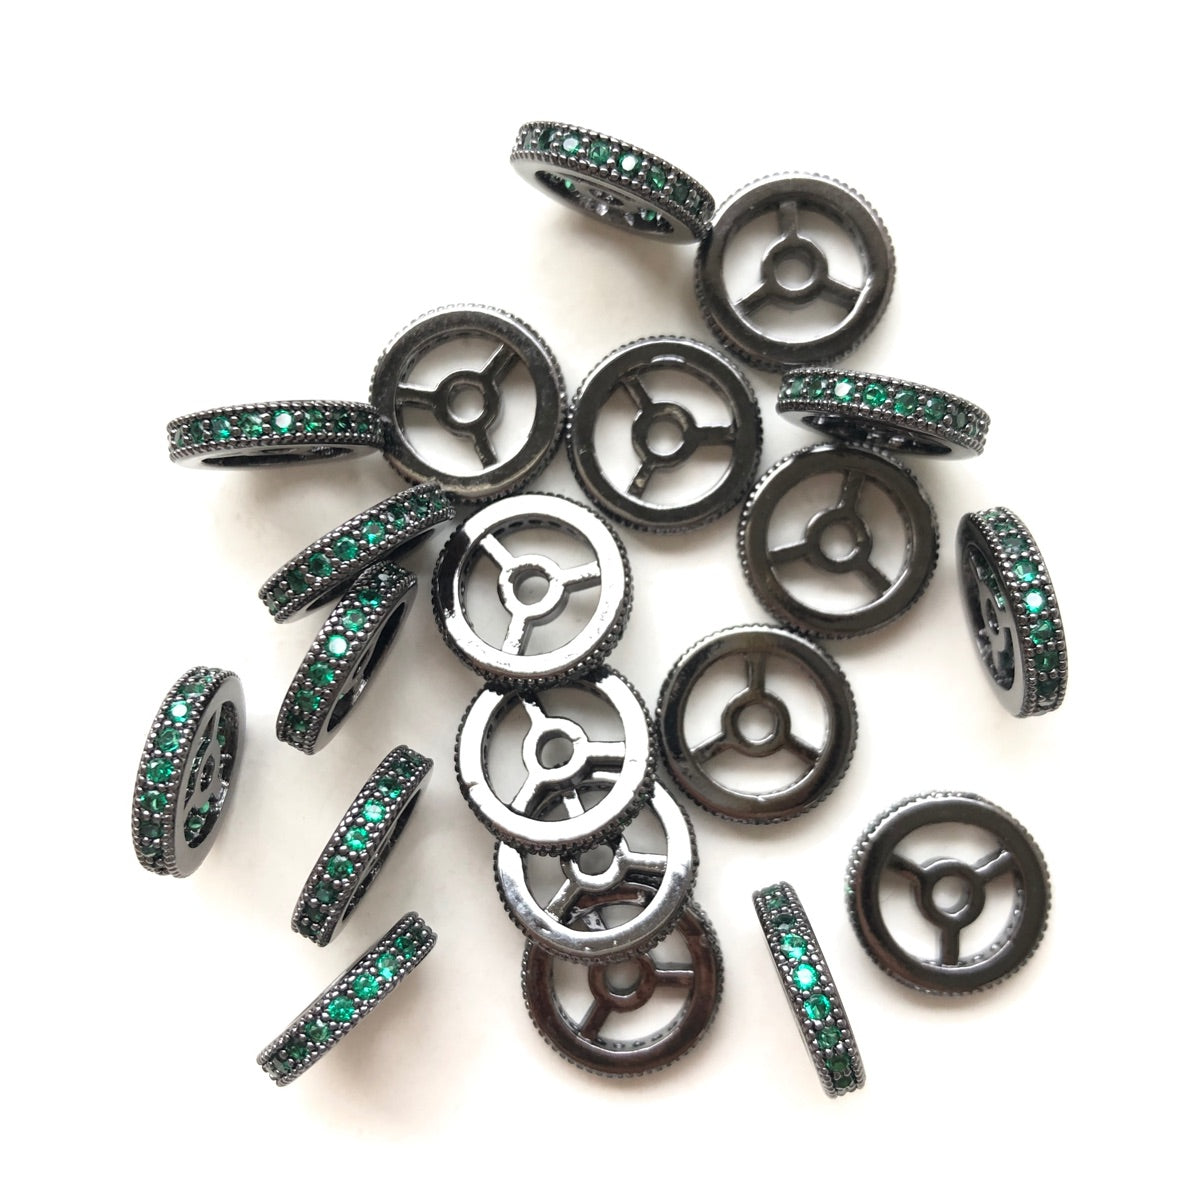 20pcs/lot 9.6/12mm Green CZ Paved Wheel Rondelle Spacers Black CZ Paved Spacers New Spacers Arrivals Rondelle Beads Charms Beads Beyond